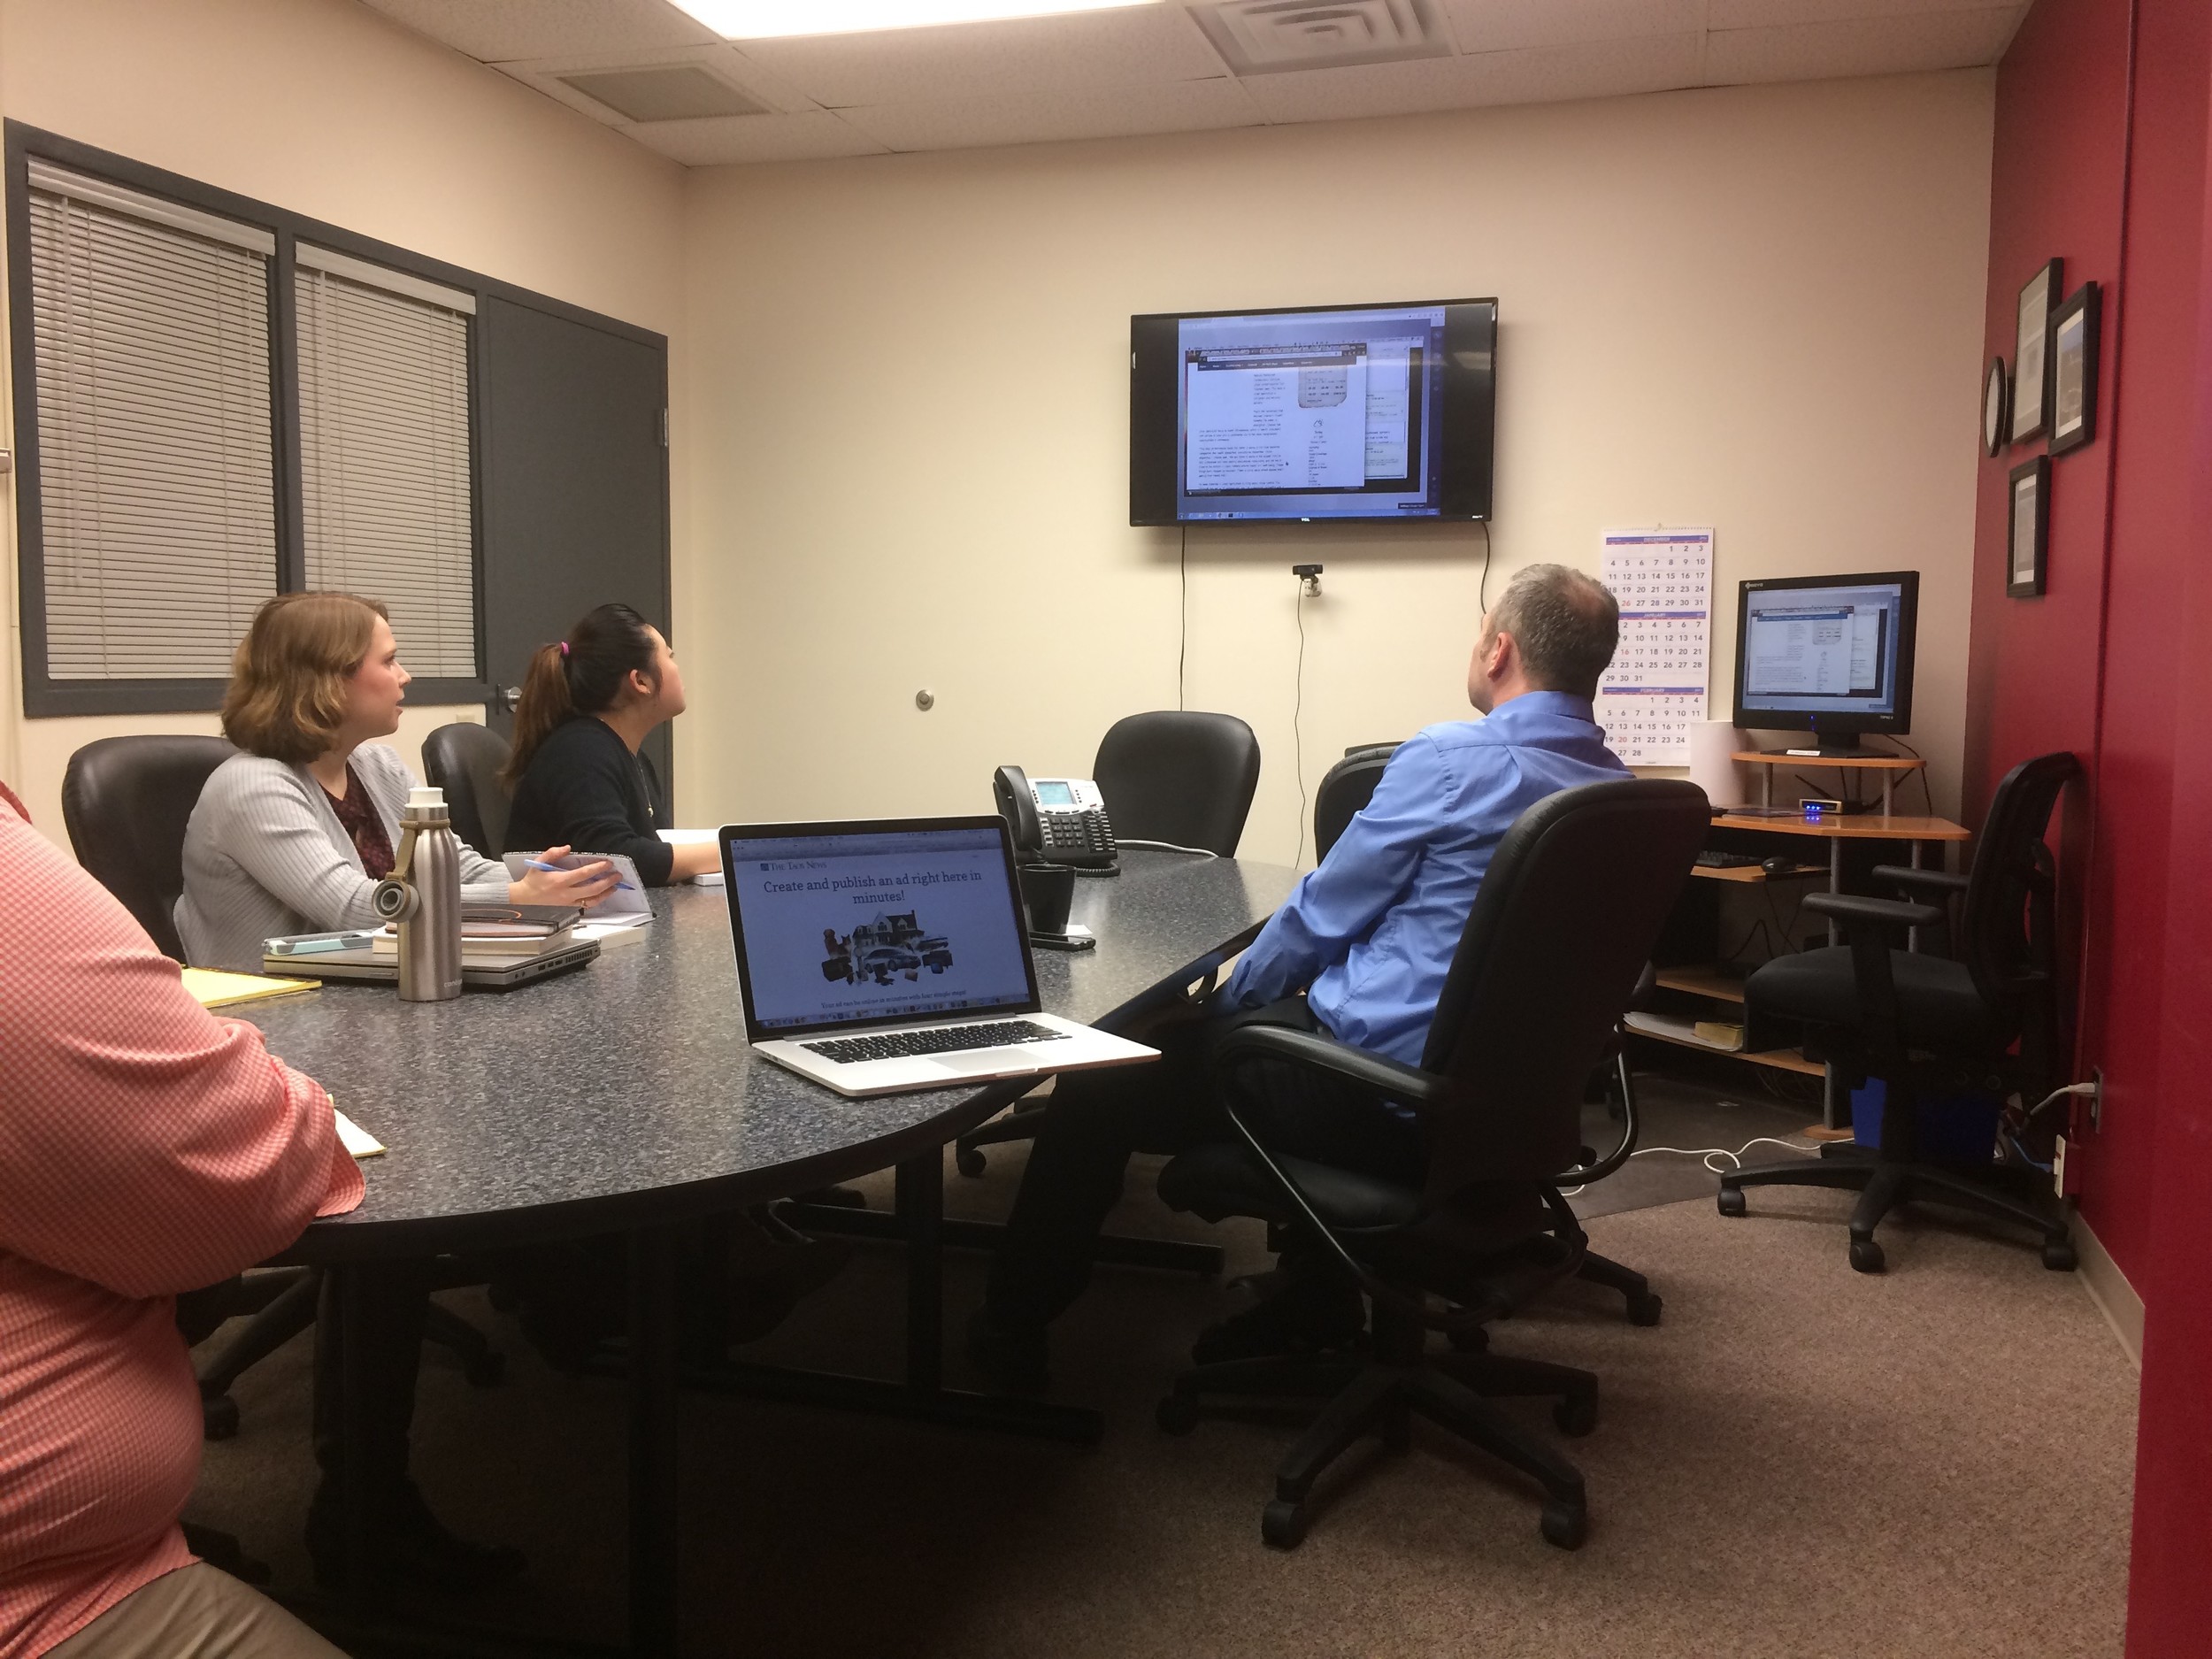 Reporters and editors at the Post Bulletin in Rochester, Minn., sit in on a creative writing webinar led by Creative Circle's writing coach, Carolyn Flynn.